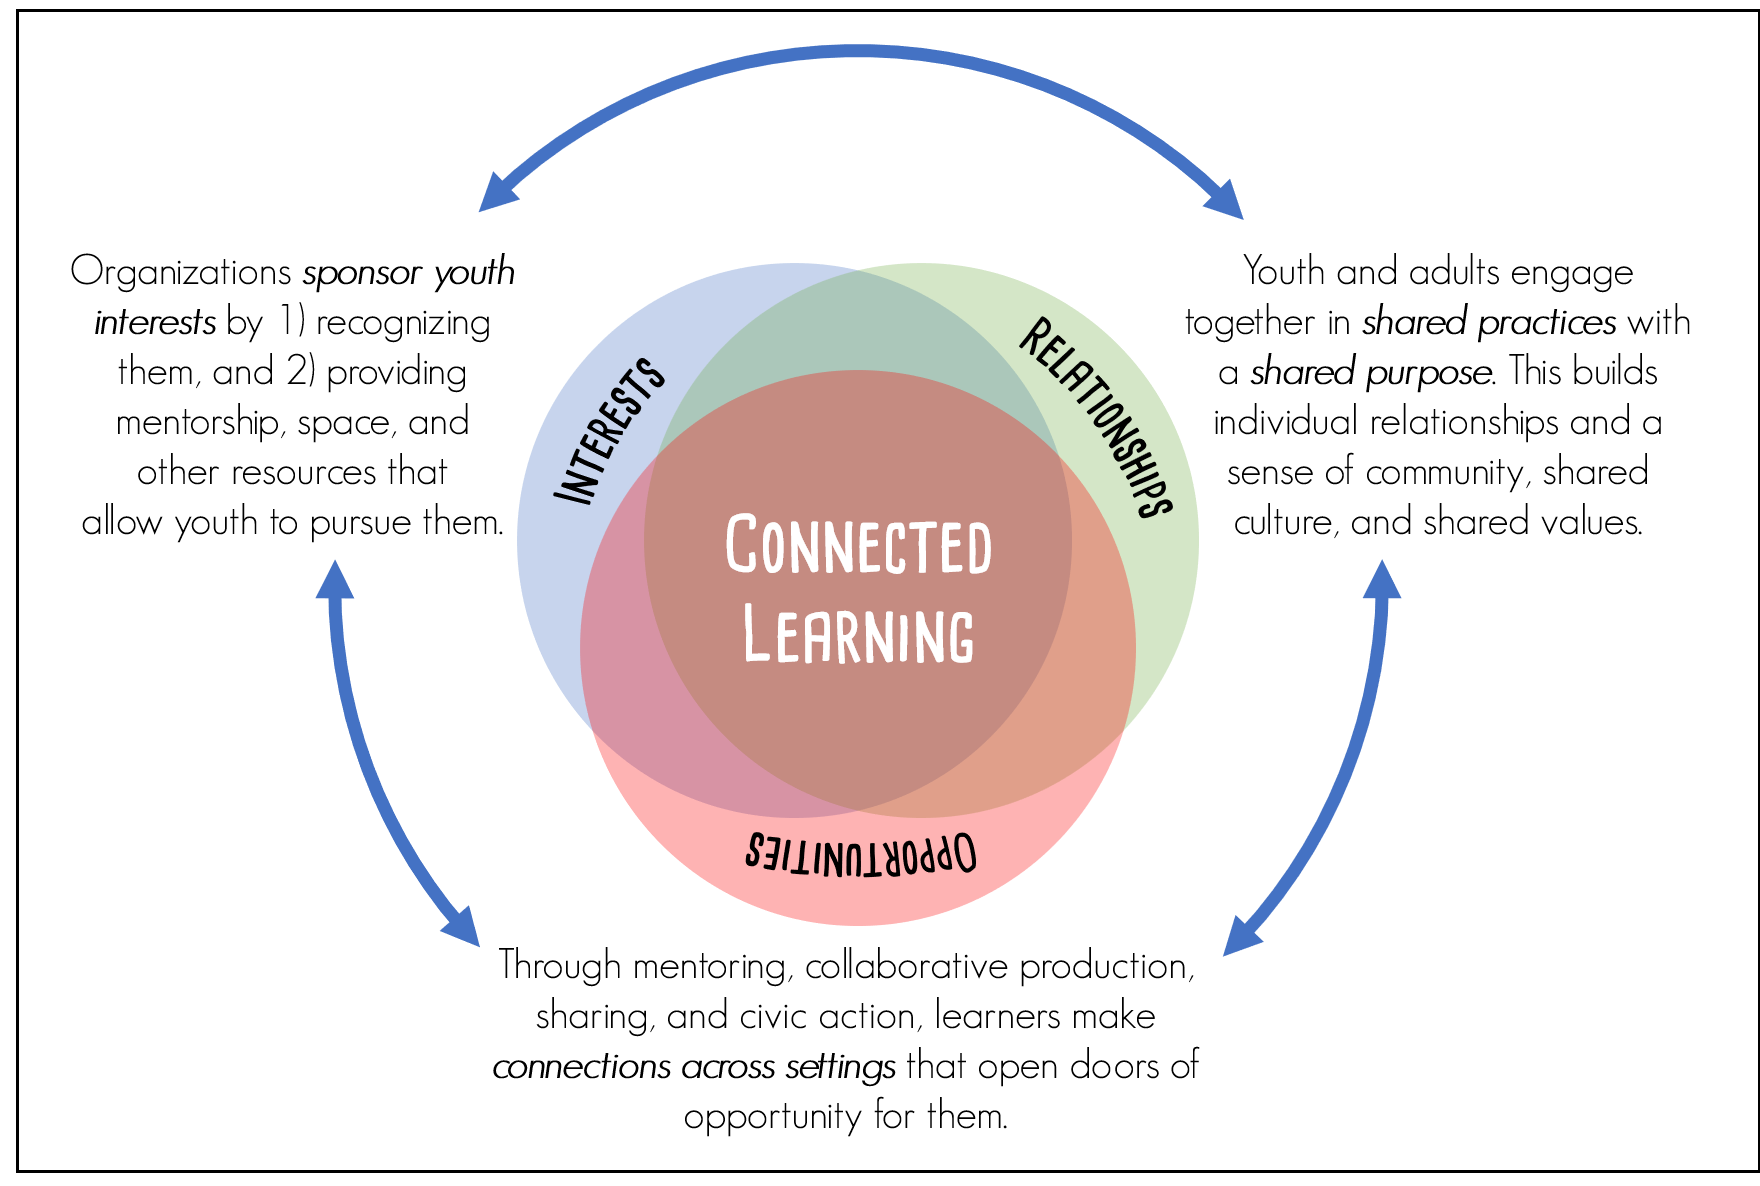 Image of the Connected Learning Framework showing interests, relationships, and opportunities.